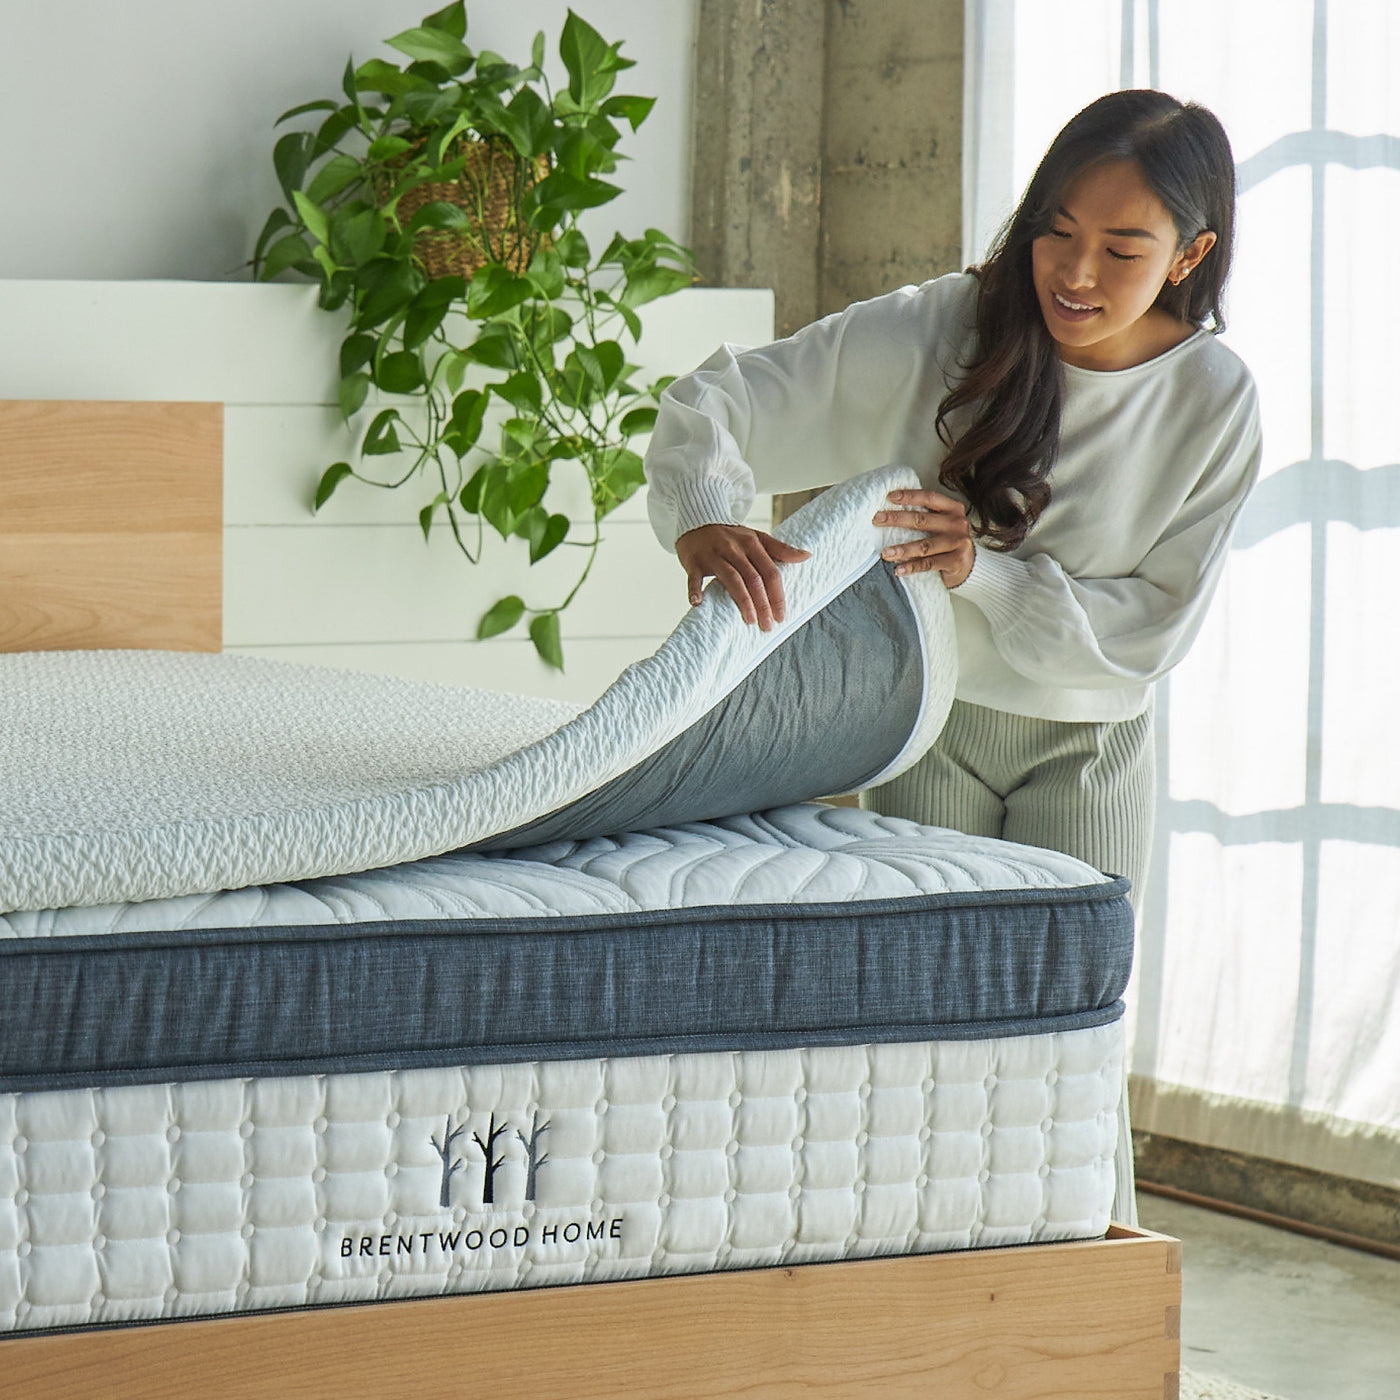 What Type Of Mattress Protector Is Suitable For A Memory Foam Mattress?